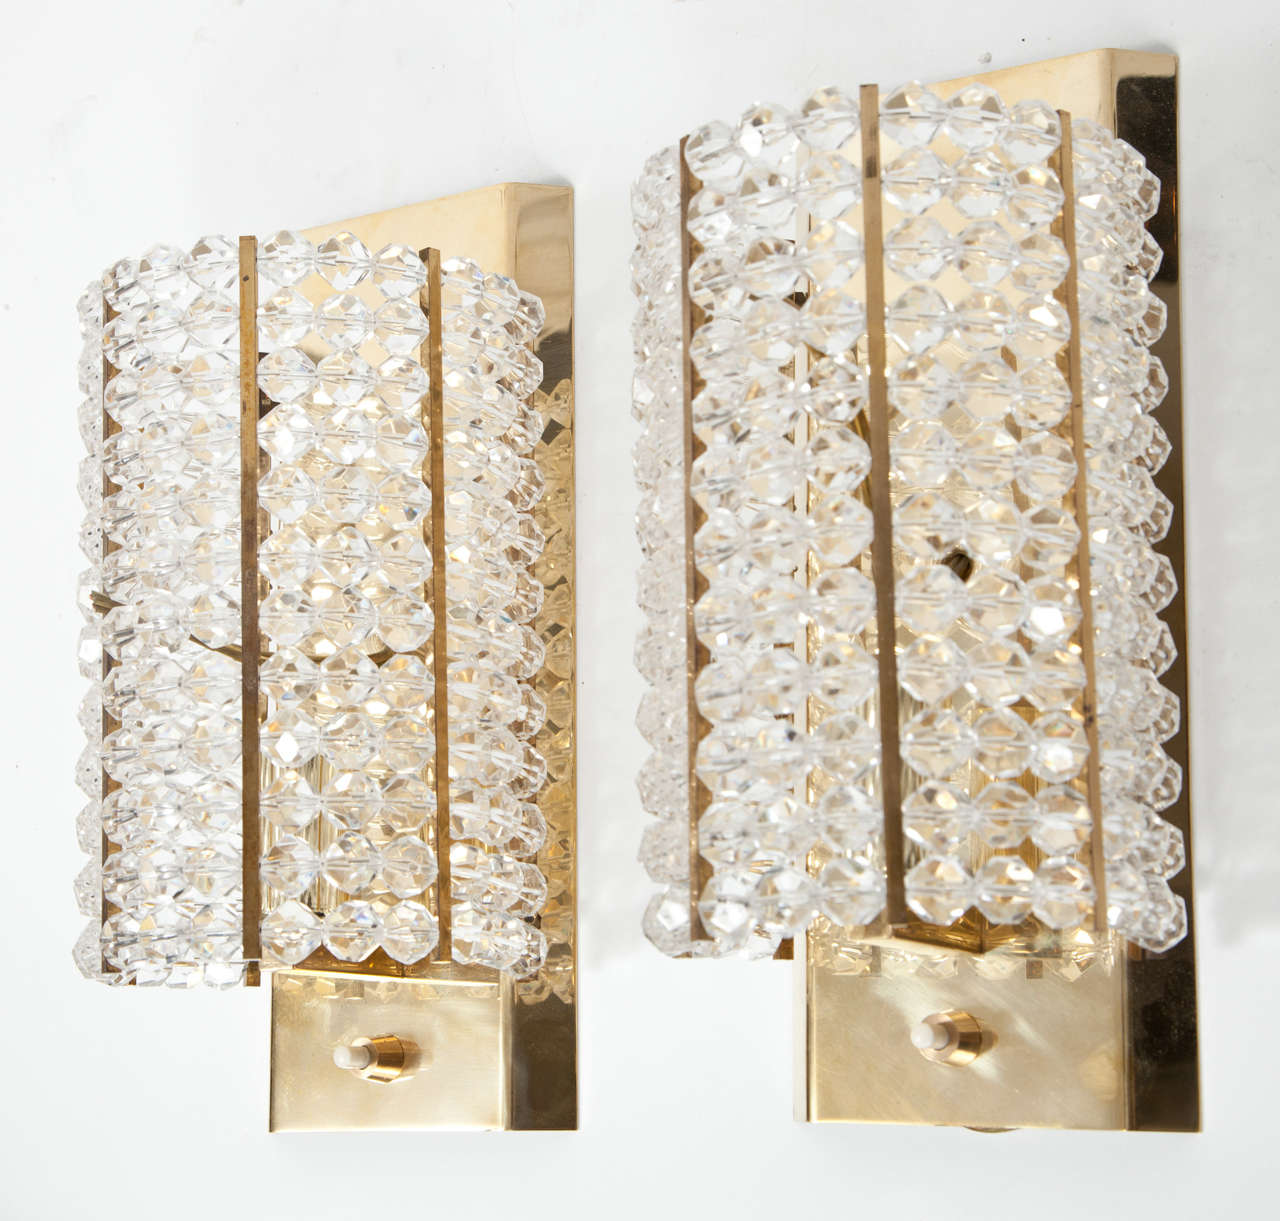 A striking pair of sconces made up of Lucite beads on a brass frame. Perfect for a small space or powder room. Newly rewired.